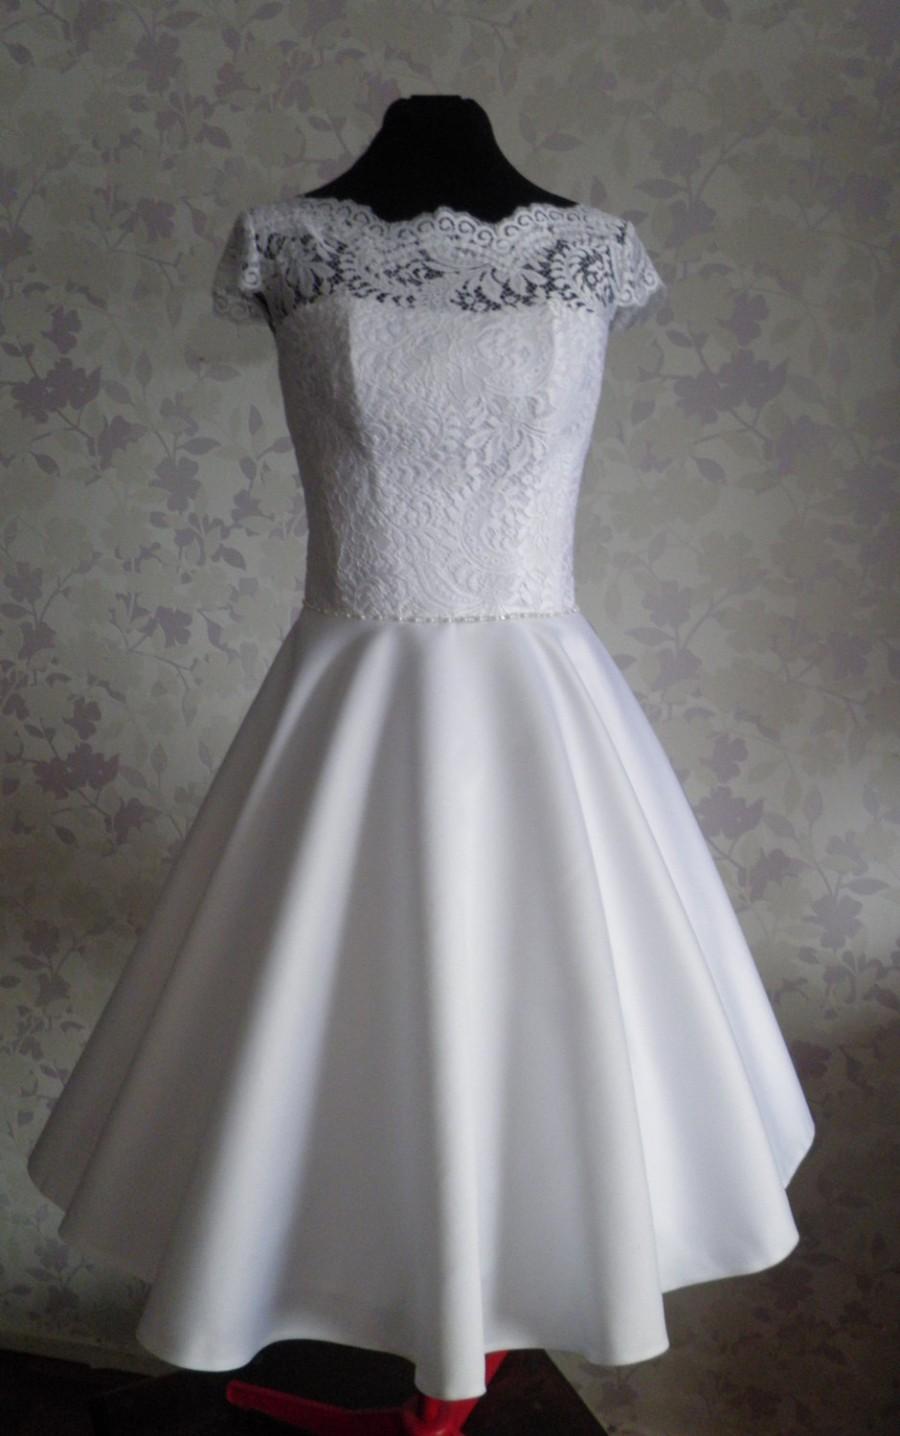 Свадьба - Vintage Inspired Wedding Dress in style of Audrey Hepburn 1950 with Tea Length Skirt, Illusion Neckline, Lace Corset, V Shaped Back Cutout